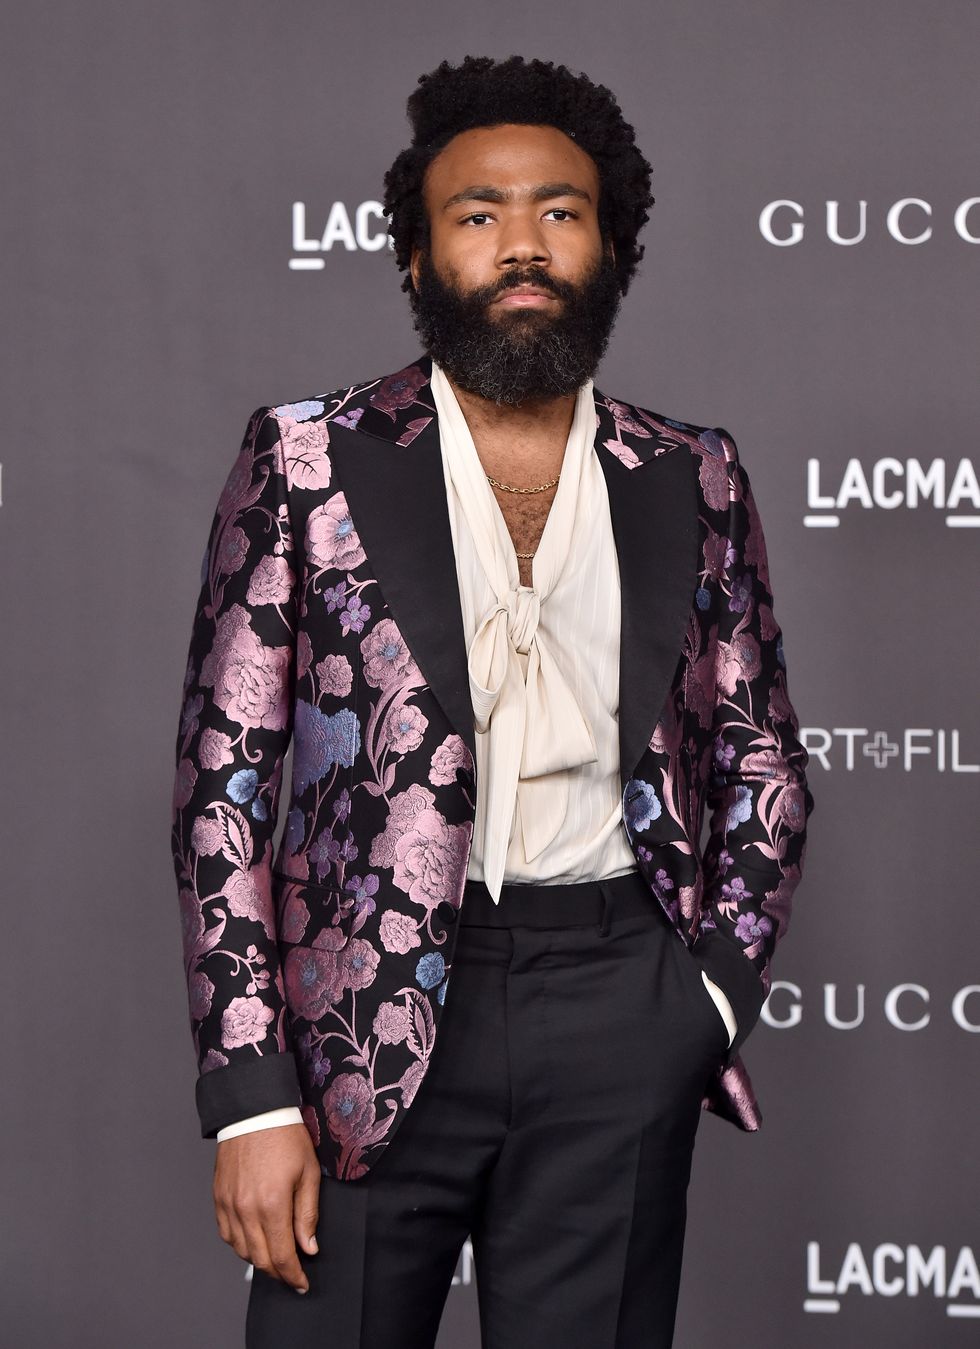 los angeles, california   november 02 donald glover attends the 2019 lacma art  film gala presented by gucci on november 02, 2019 in los angeles, california photo by axellebauer griffinfilmmagic